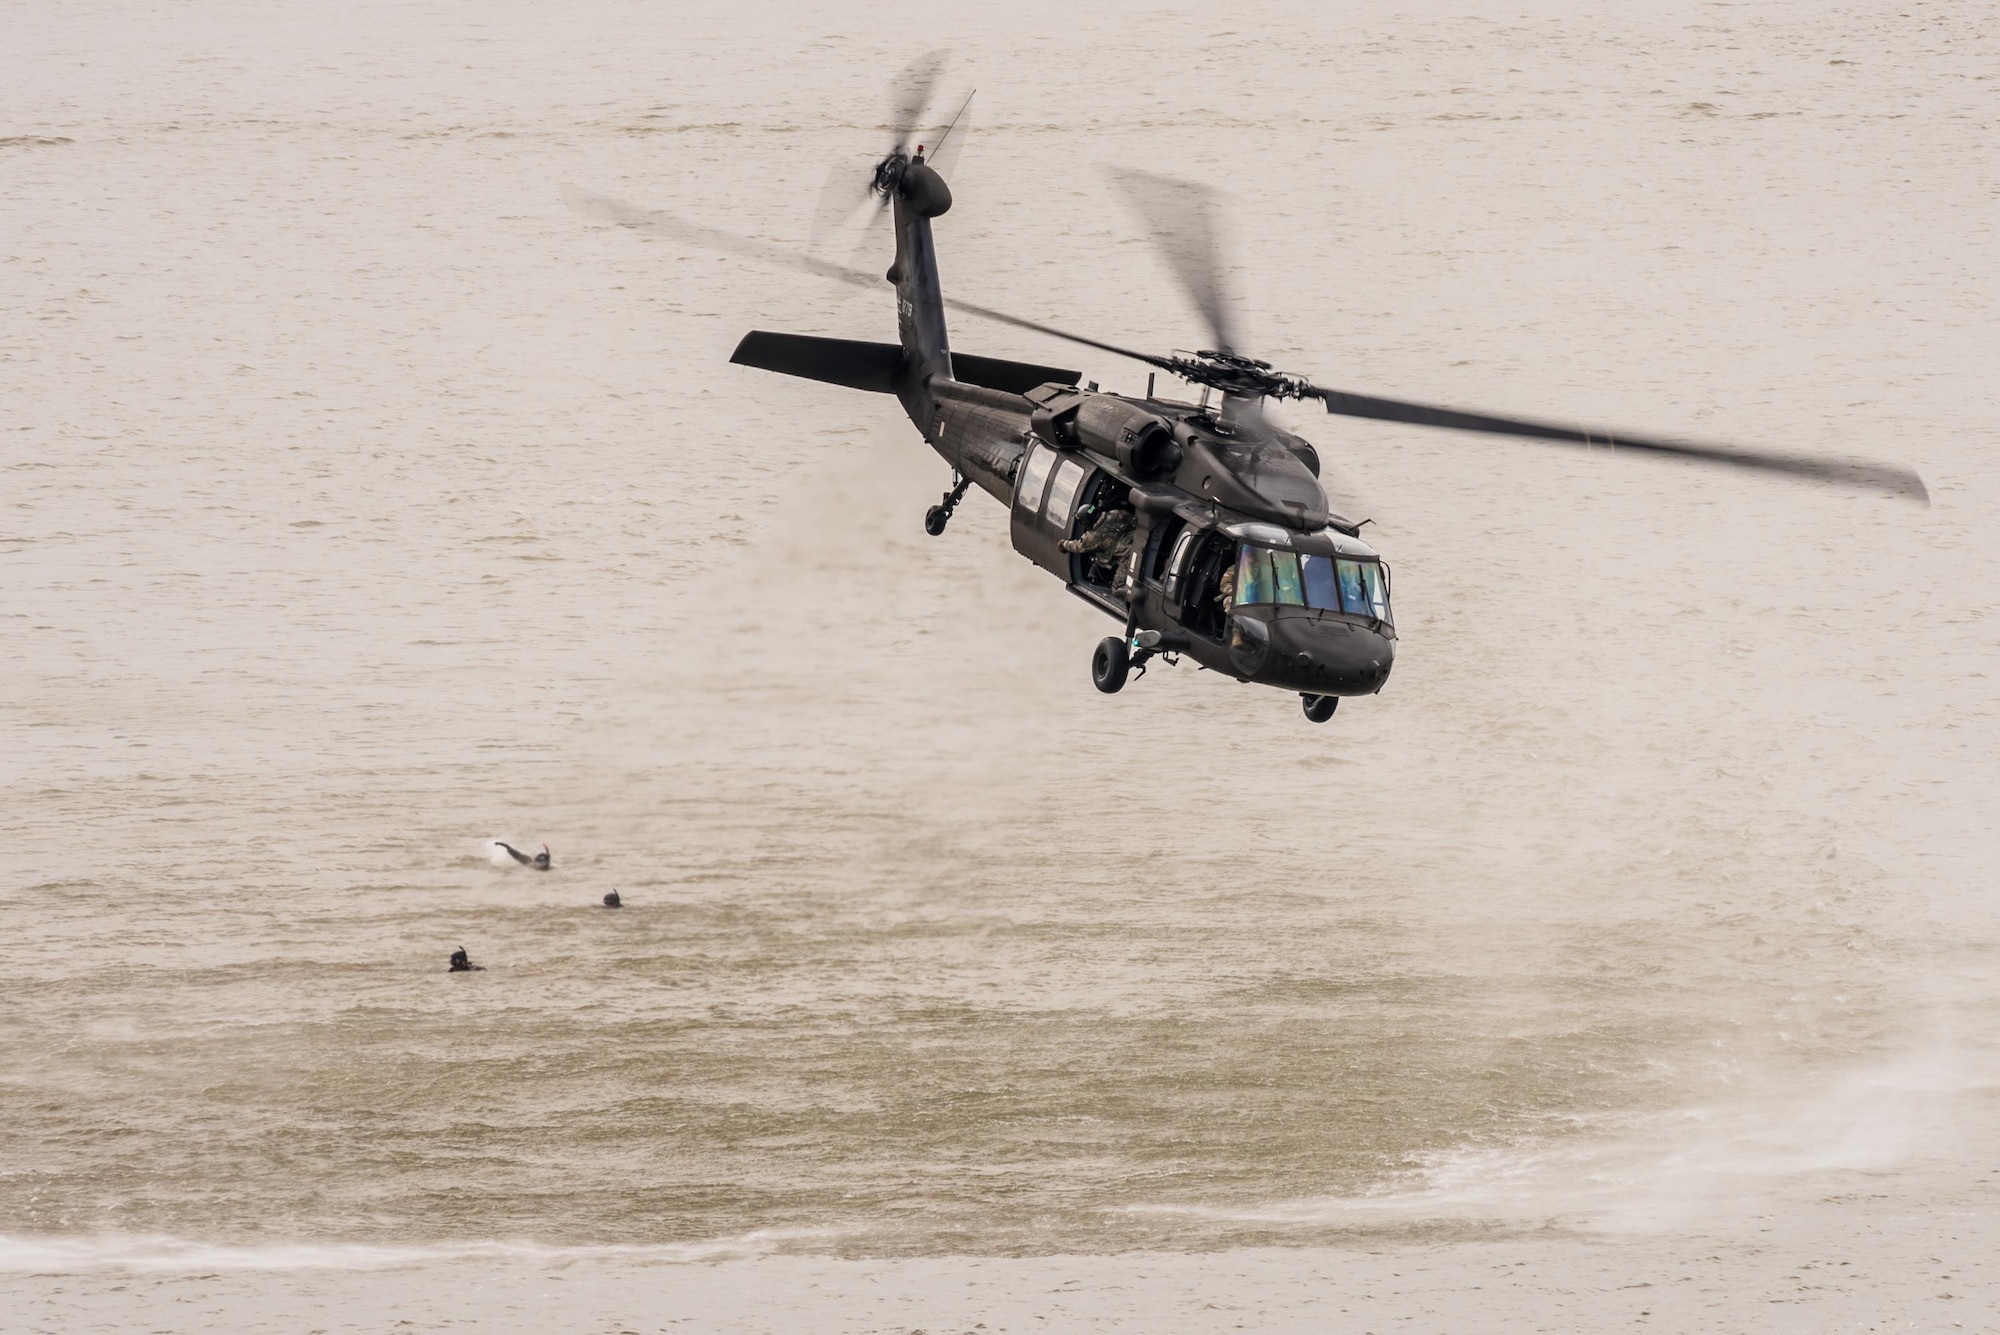 A Kentucky Army National Guard UH-60 Blackhawk helicopter flies over the Ohio River after deploying Kentucky Air National Guardsmen into to the water to conduct a simulated rescue mission during the Thunder Over Louisville air show in Louisville, Ky., April 22, 2017. The annual show has grown to become the largest single-day event of its kind in the nation. (U.S. Air National Guard photo by Lt. Col. Dale Greer)